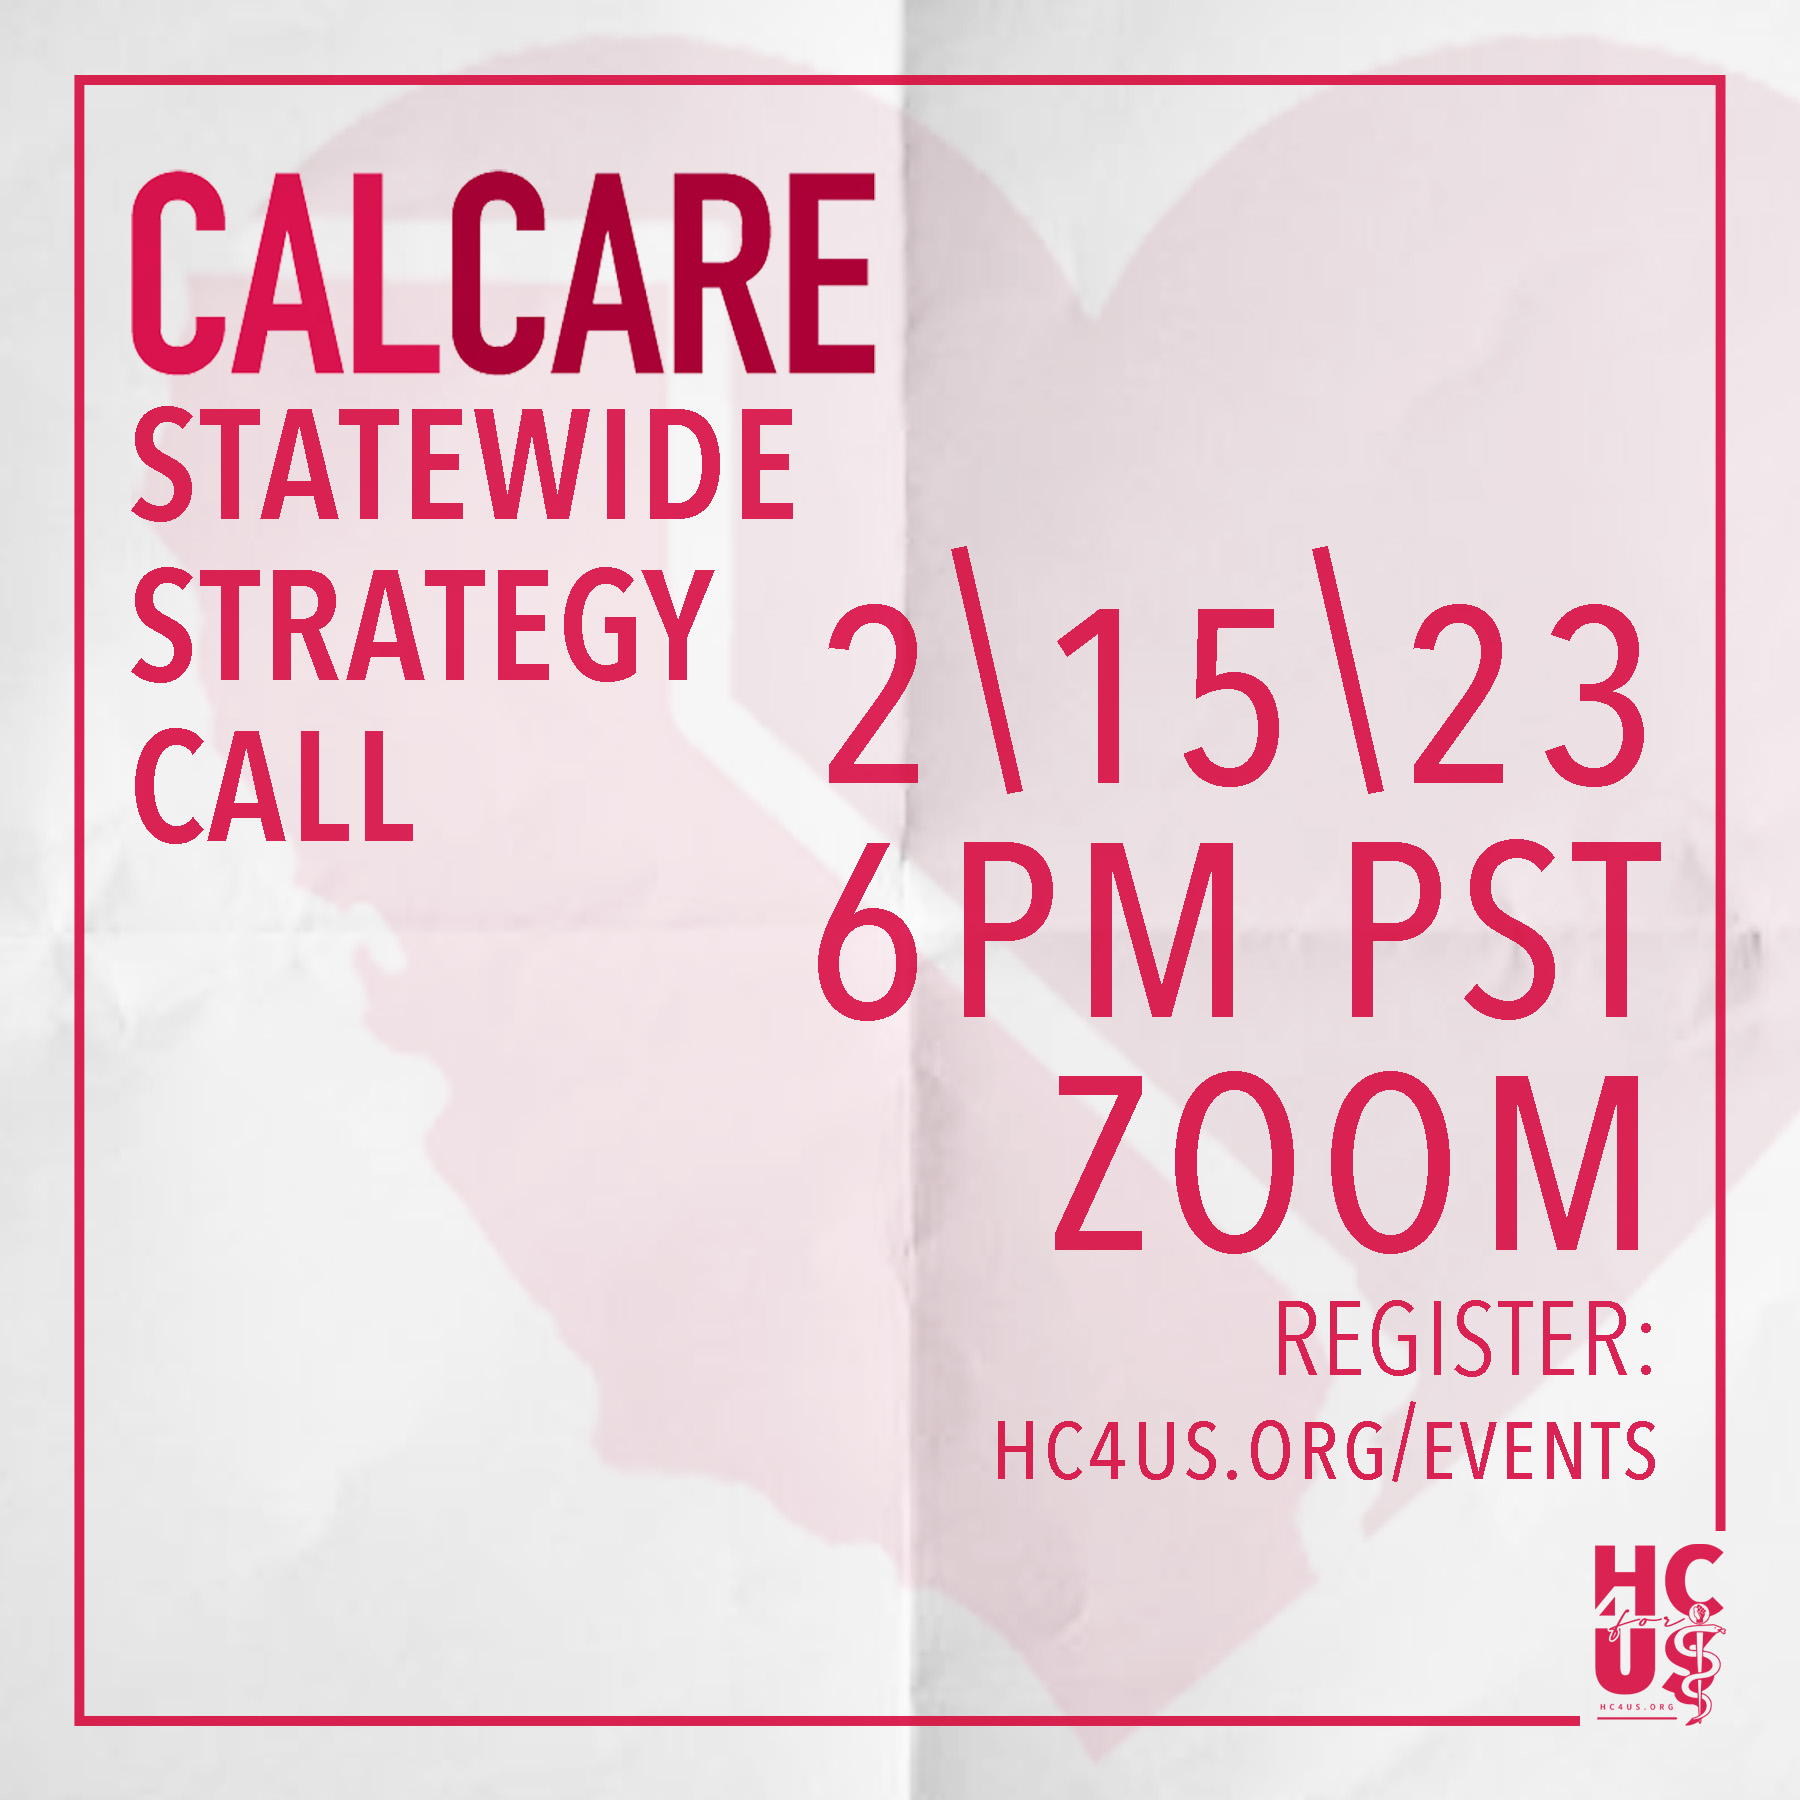 CALCARE STATEWIDE STRATEGY CALL